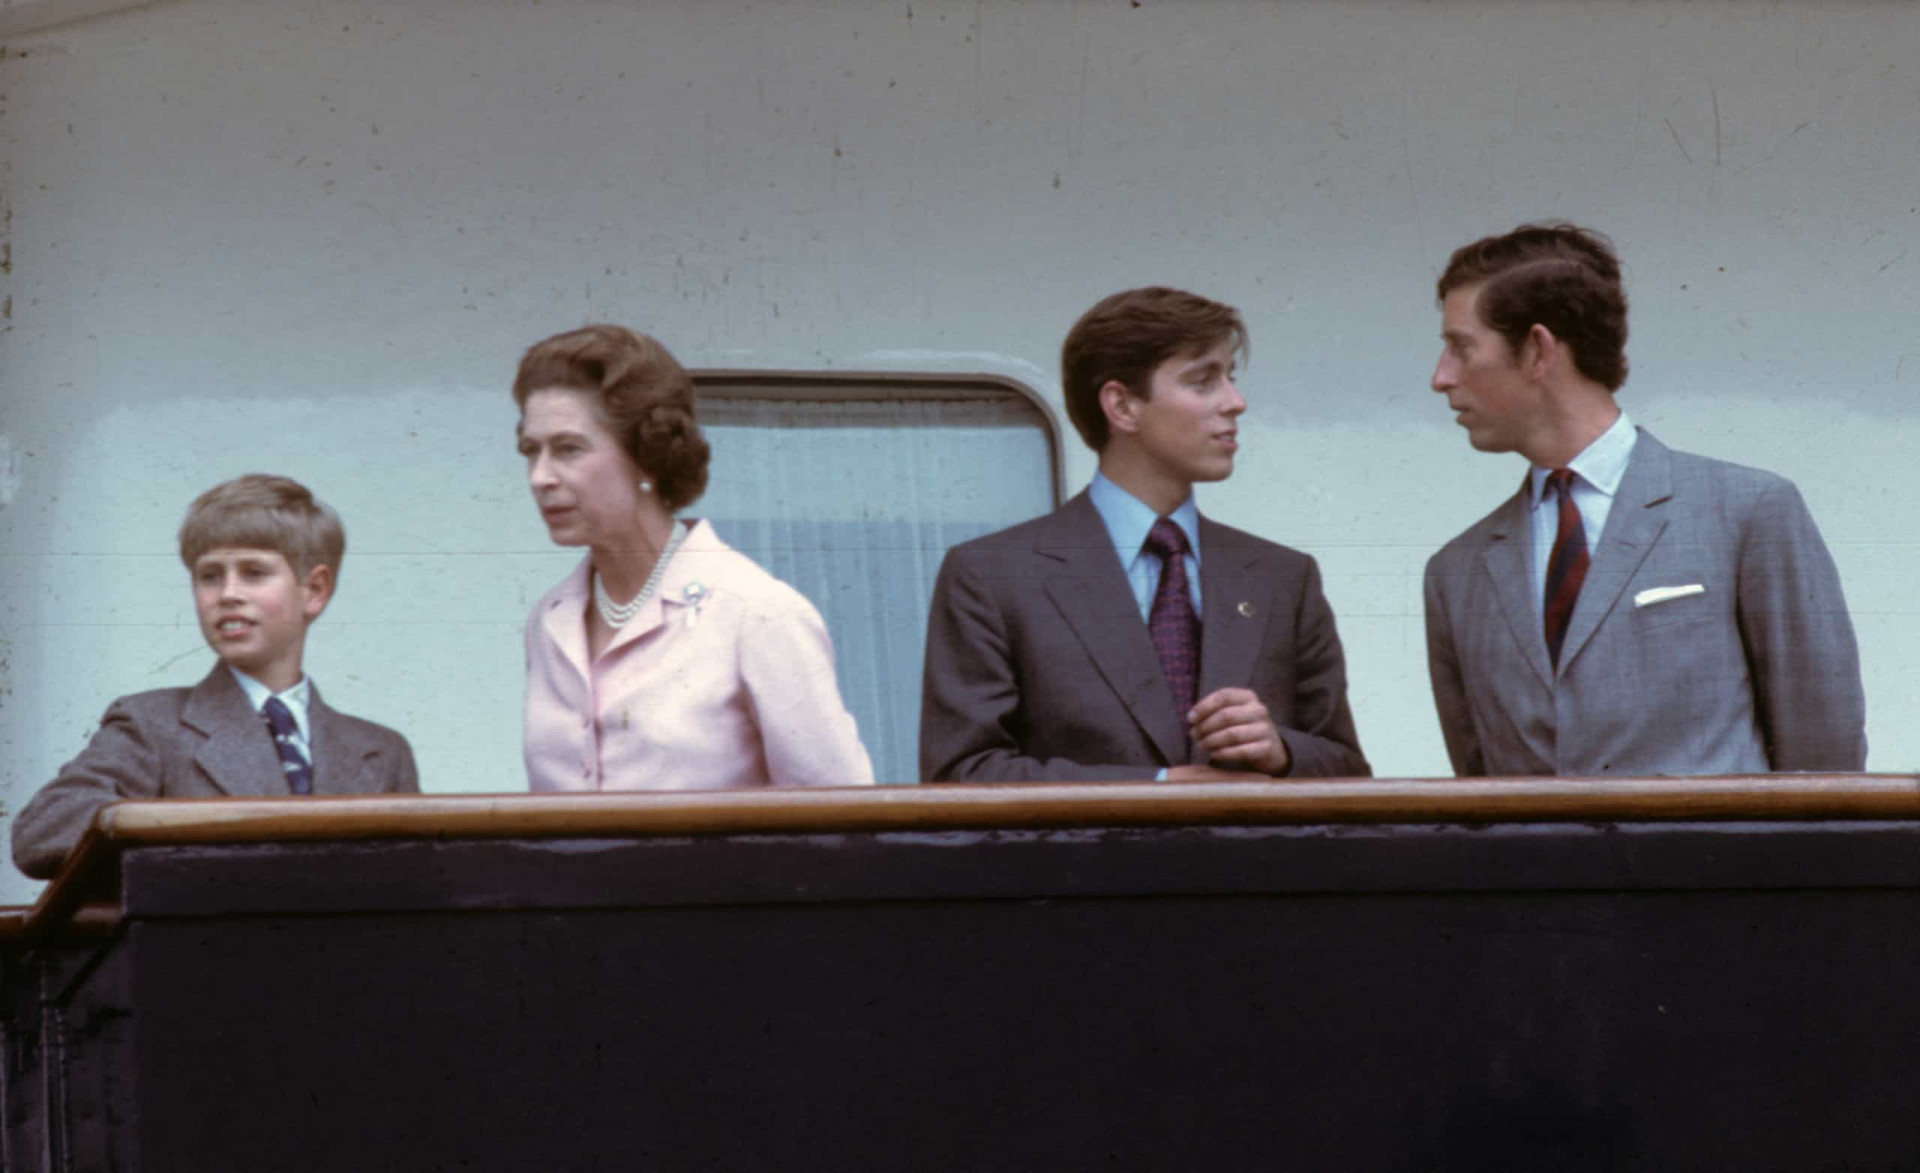 <p>Queen Elizabeth II with her sons Prince Edward, Prince Andrew, and Prince Charles on the deck of the <em>Britannia</em> as they arrive to attend the Olympic Games on July 1, 1976 in Montreal, Canada. Absent is Princess Anne, who was an athlete competing for the British equestrian team at the Summer Olympic Games that year.</p><p><a href="https://www.msn.com/en-us/community/channel/vid-7xx8mnucu55yw63we9va2gwr7uihbxwc68fxqp25x6tg4ftibpra?cvid=94631541bc0f4f89bfd59158d696ad7e">Follow us and access great exclusive content every day</a></p>